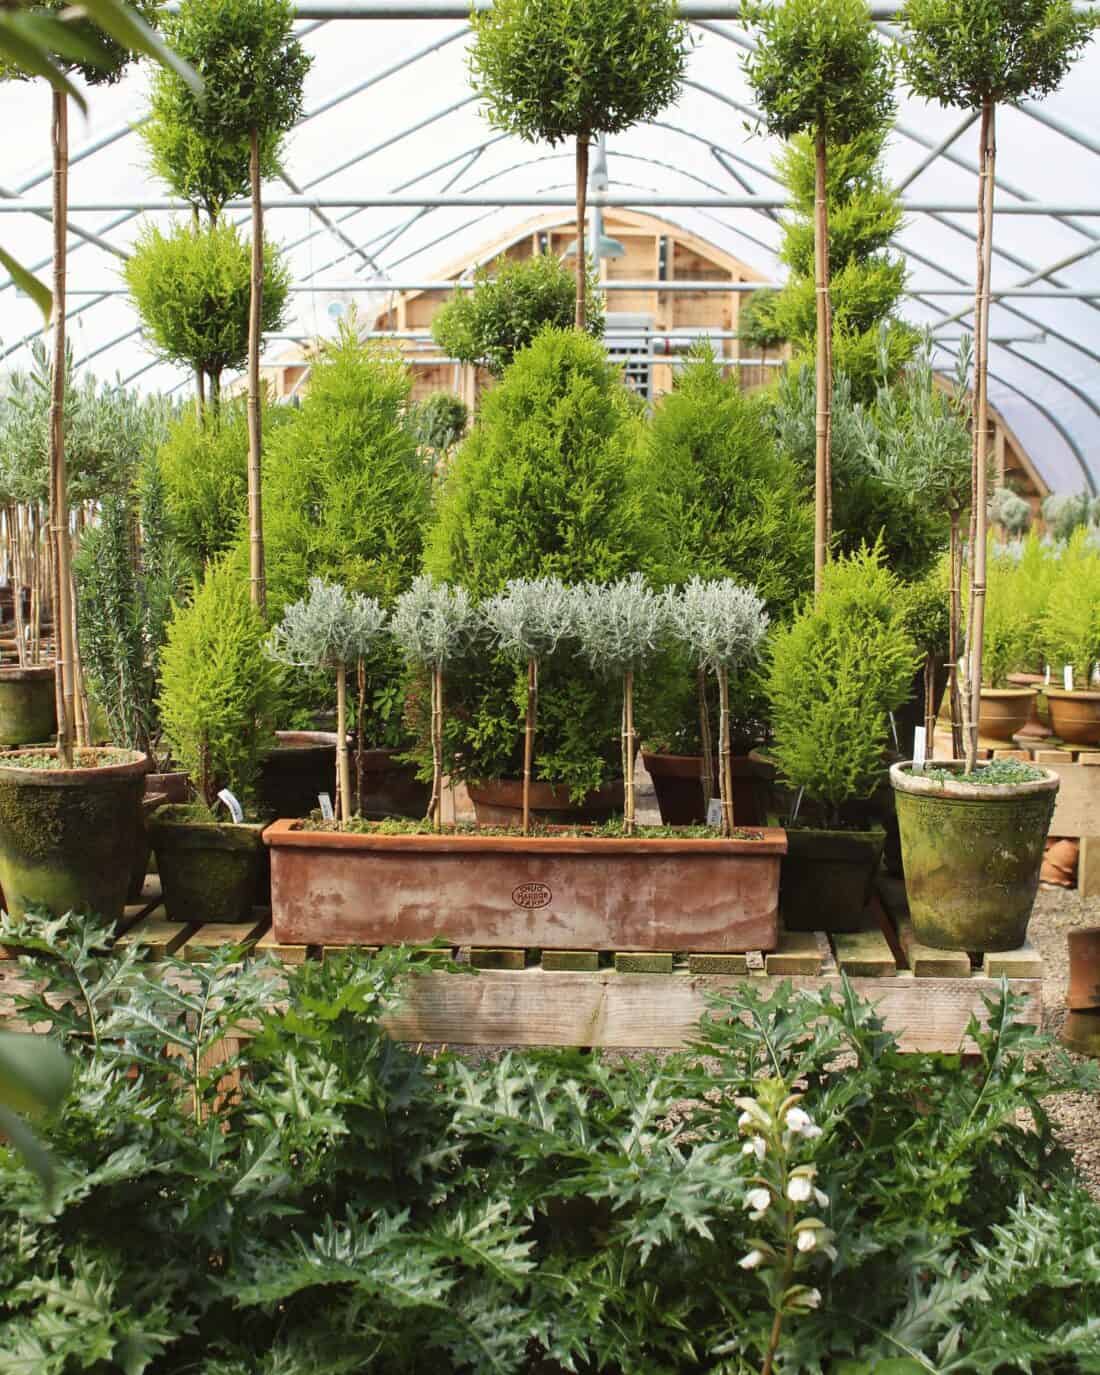 A lush greenhouse reminiscent of a Boston Garden Center, filled with a variety of potted plants. Tall, clipped topiary trees and coniferous shrubs are arranged neatly among smaller plants. The structure’s curved roof and wooden framework are visible, creating an organized and serene atmosphere.